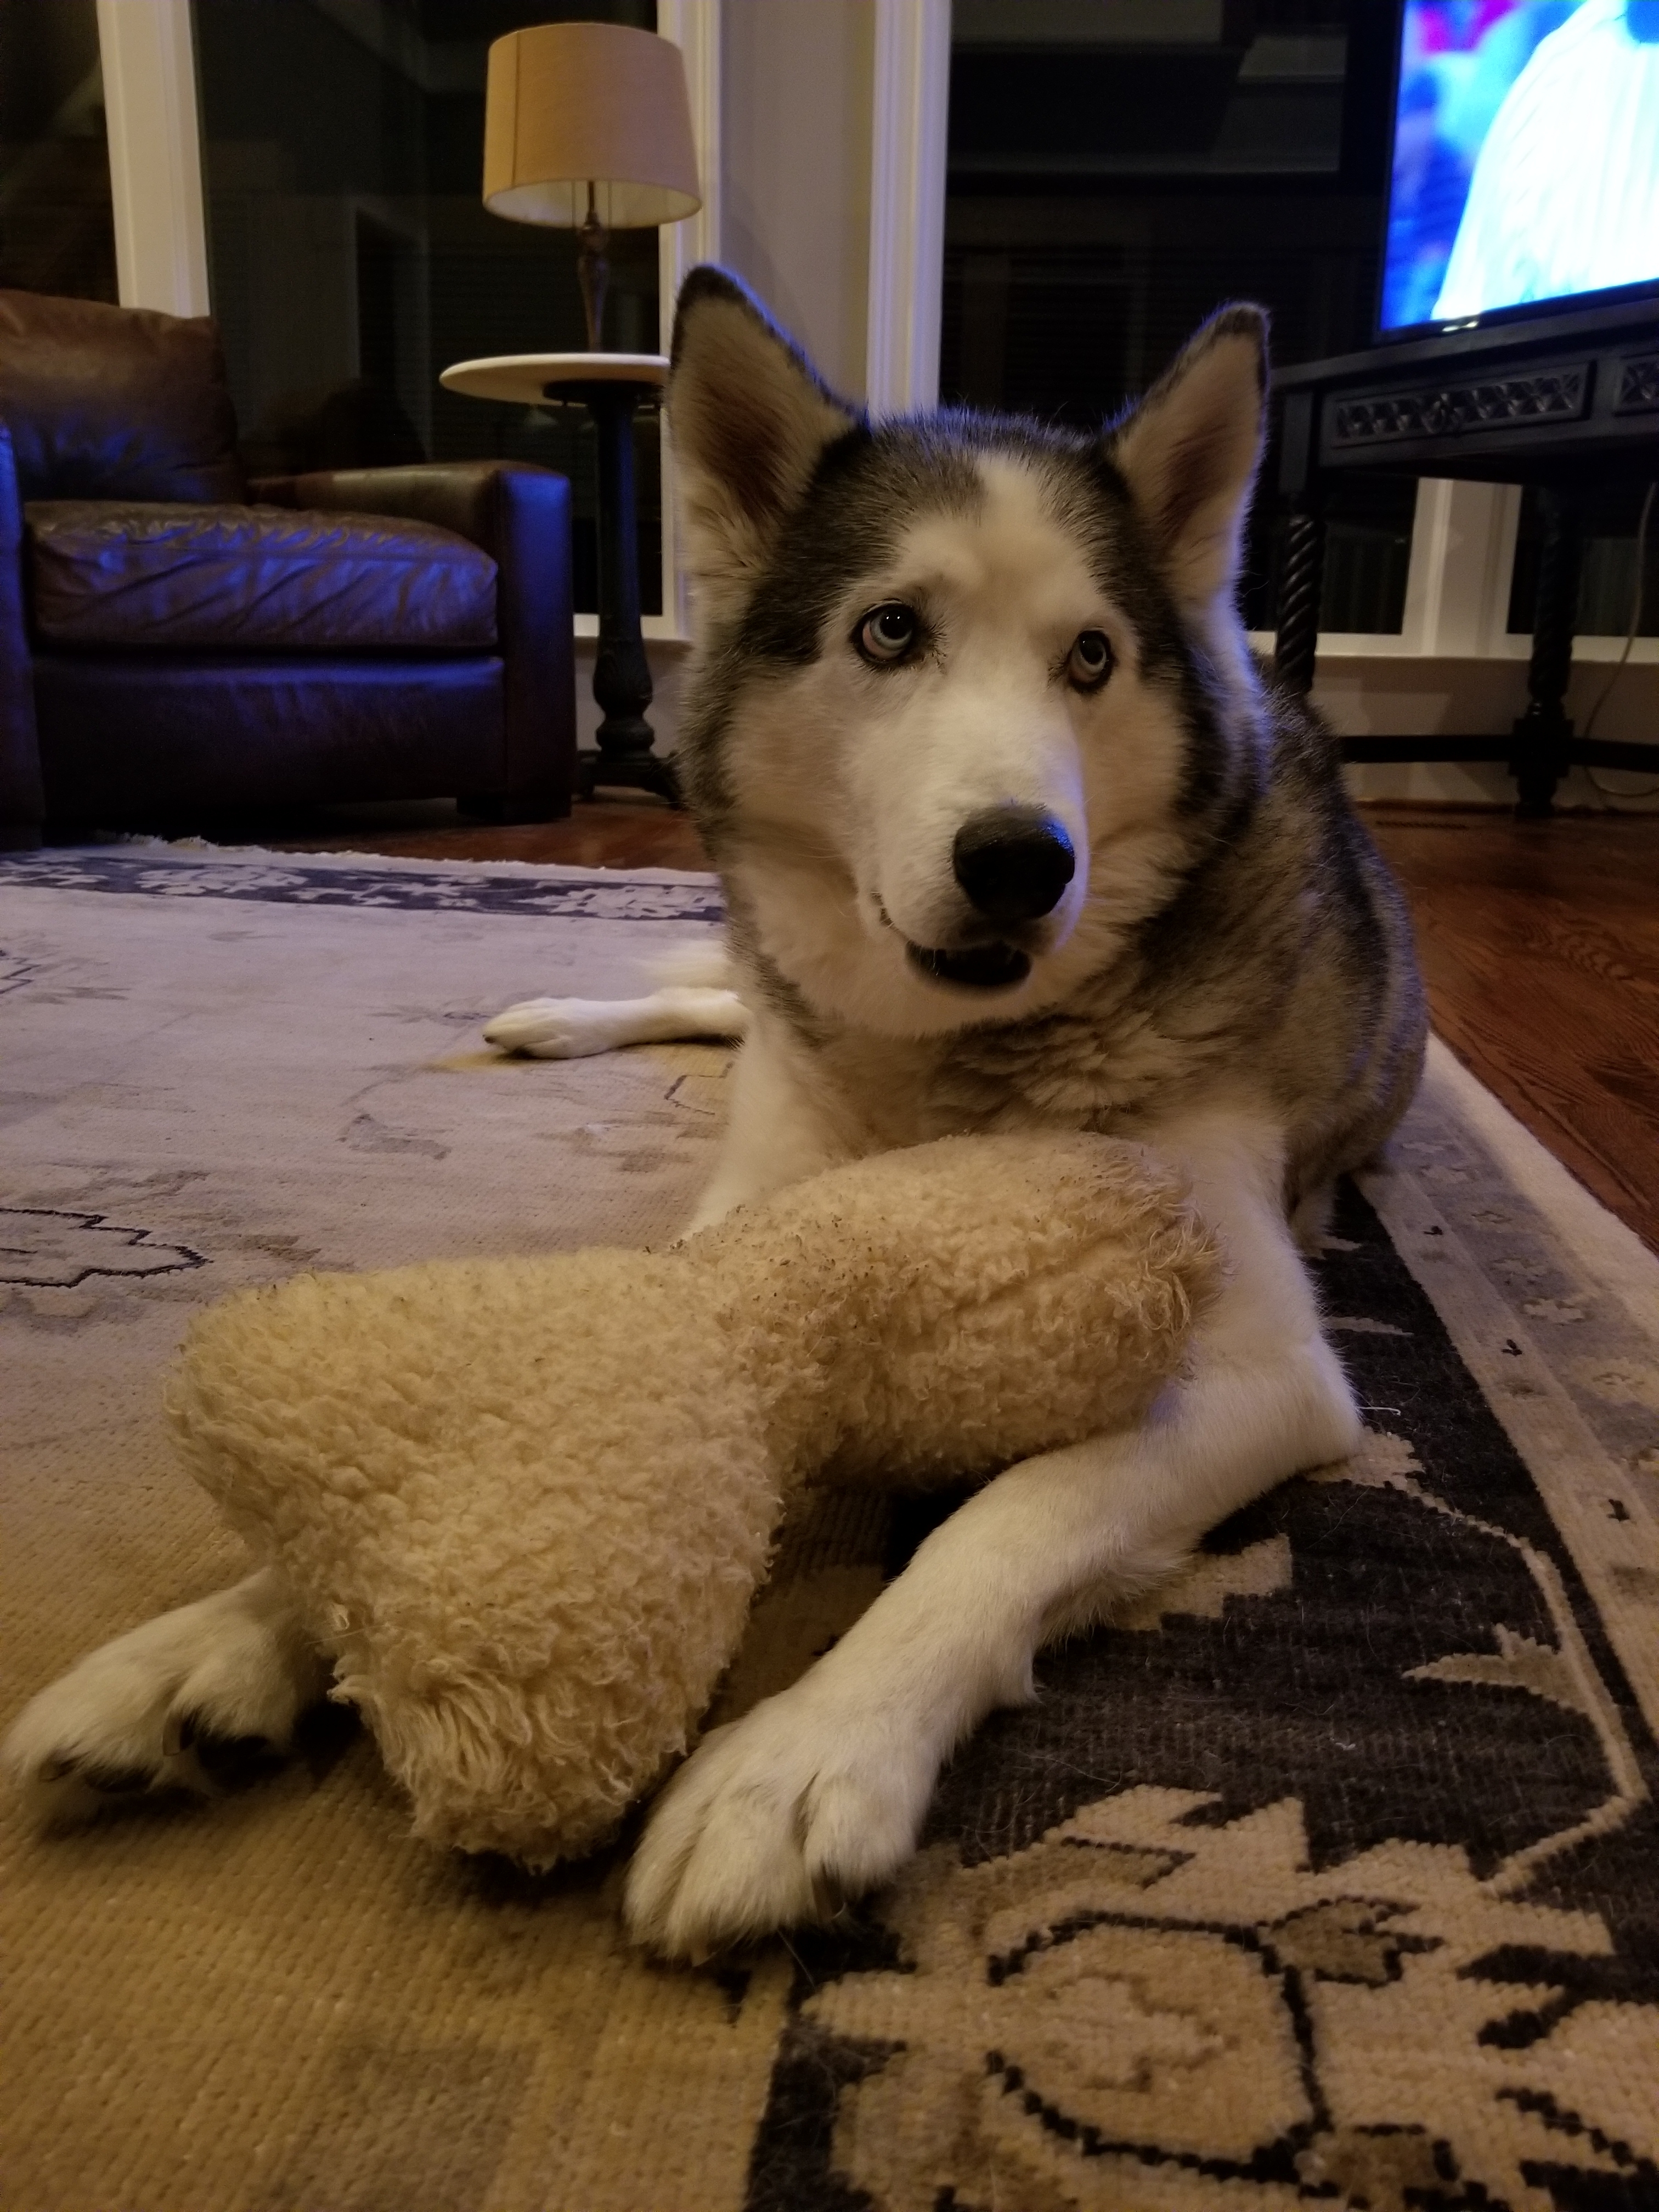 Hunter and his favorite toy